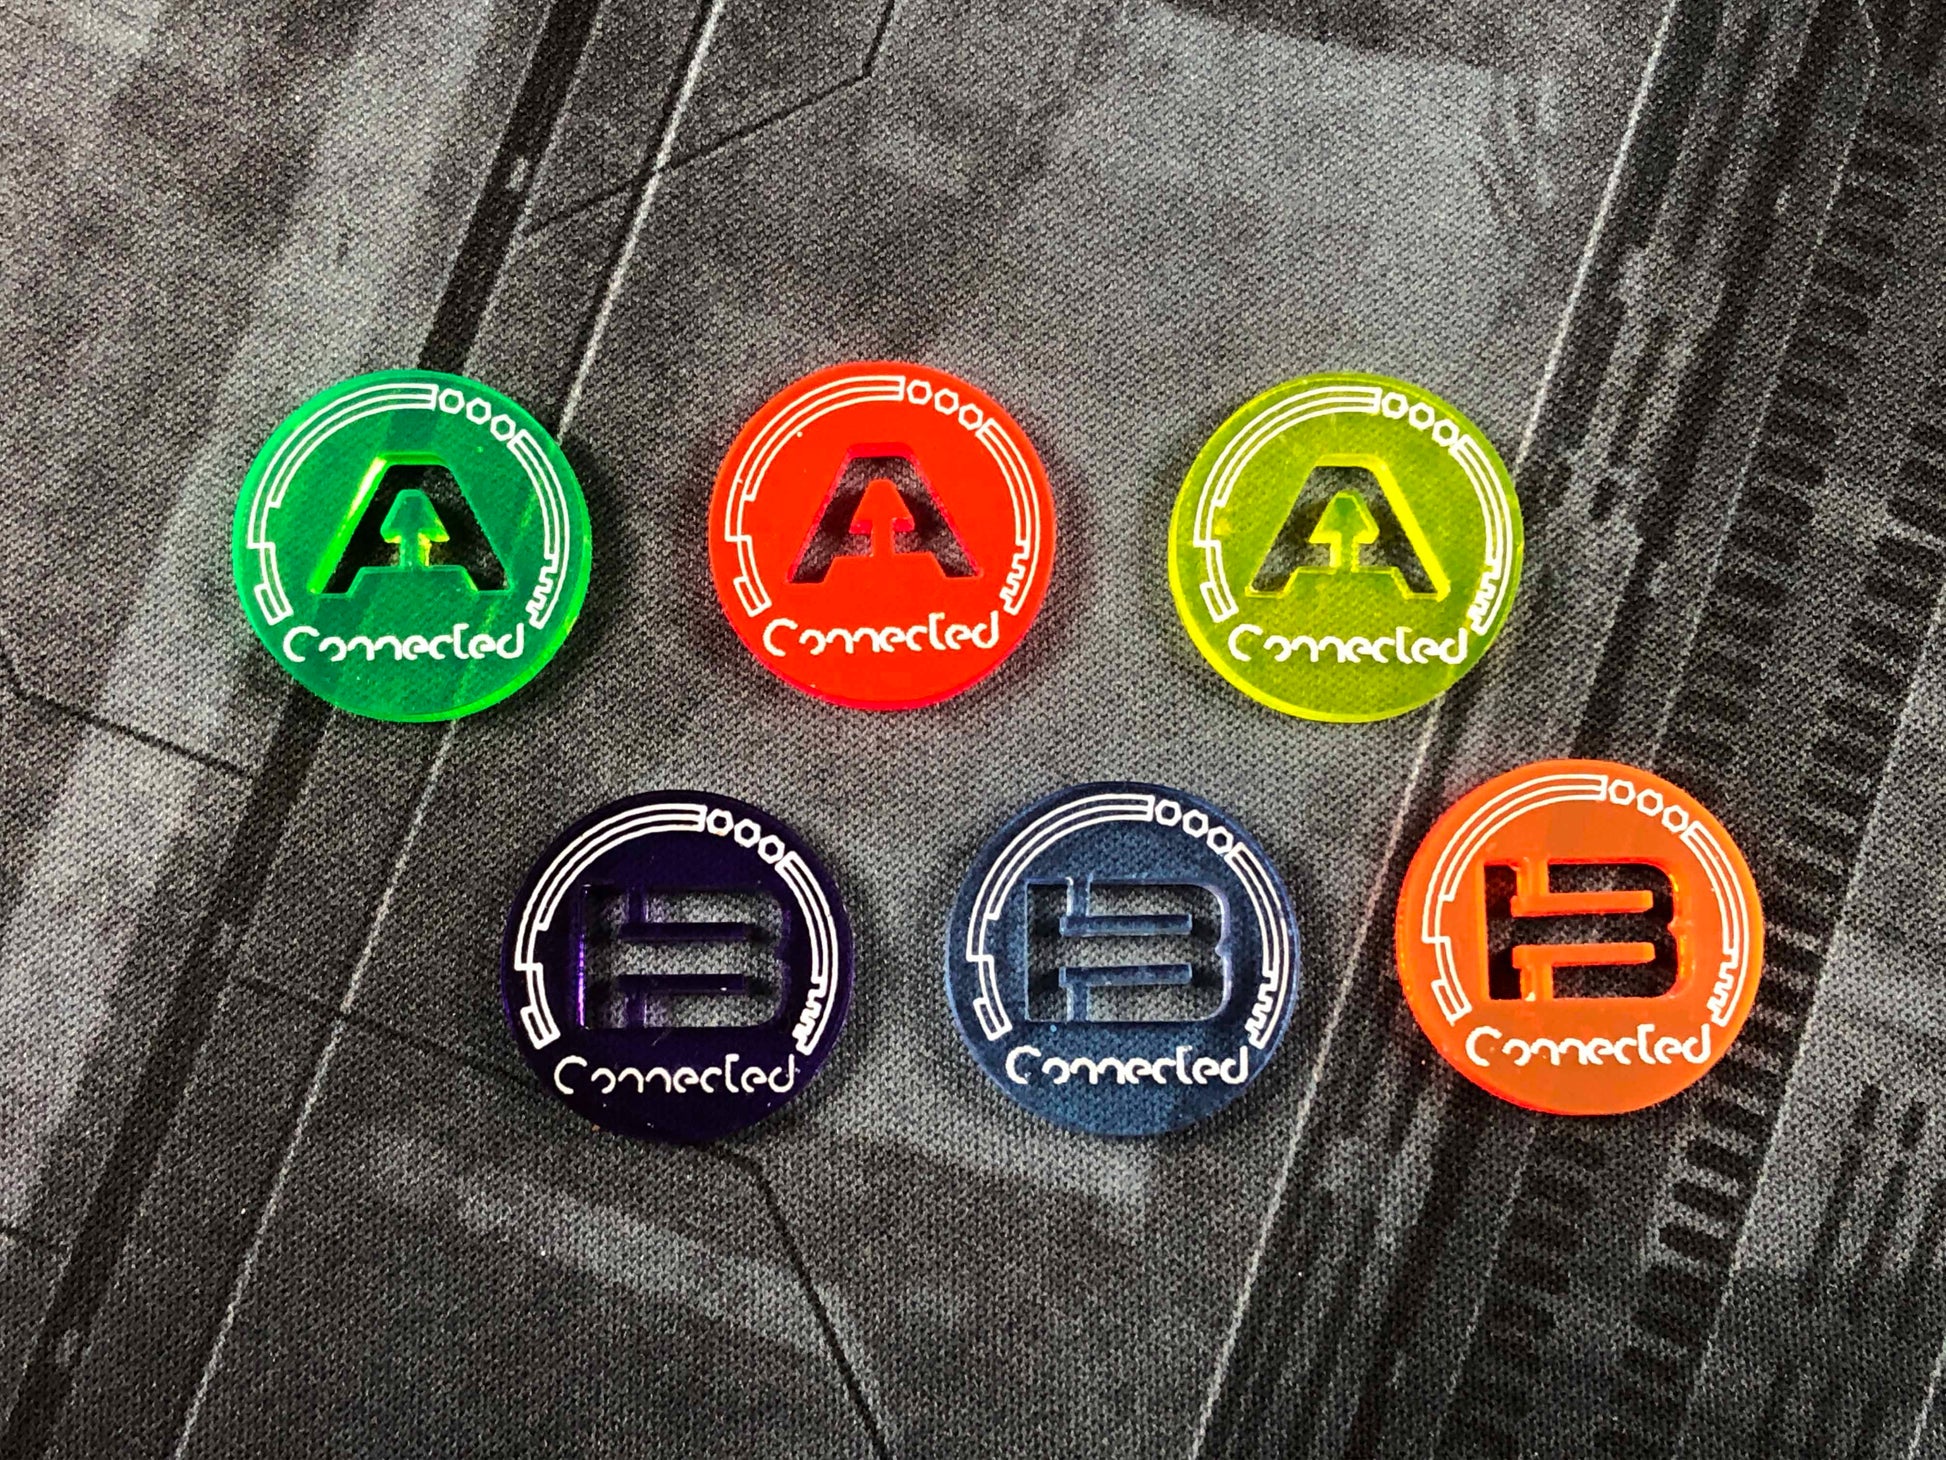 Infinity Connected Tokens